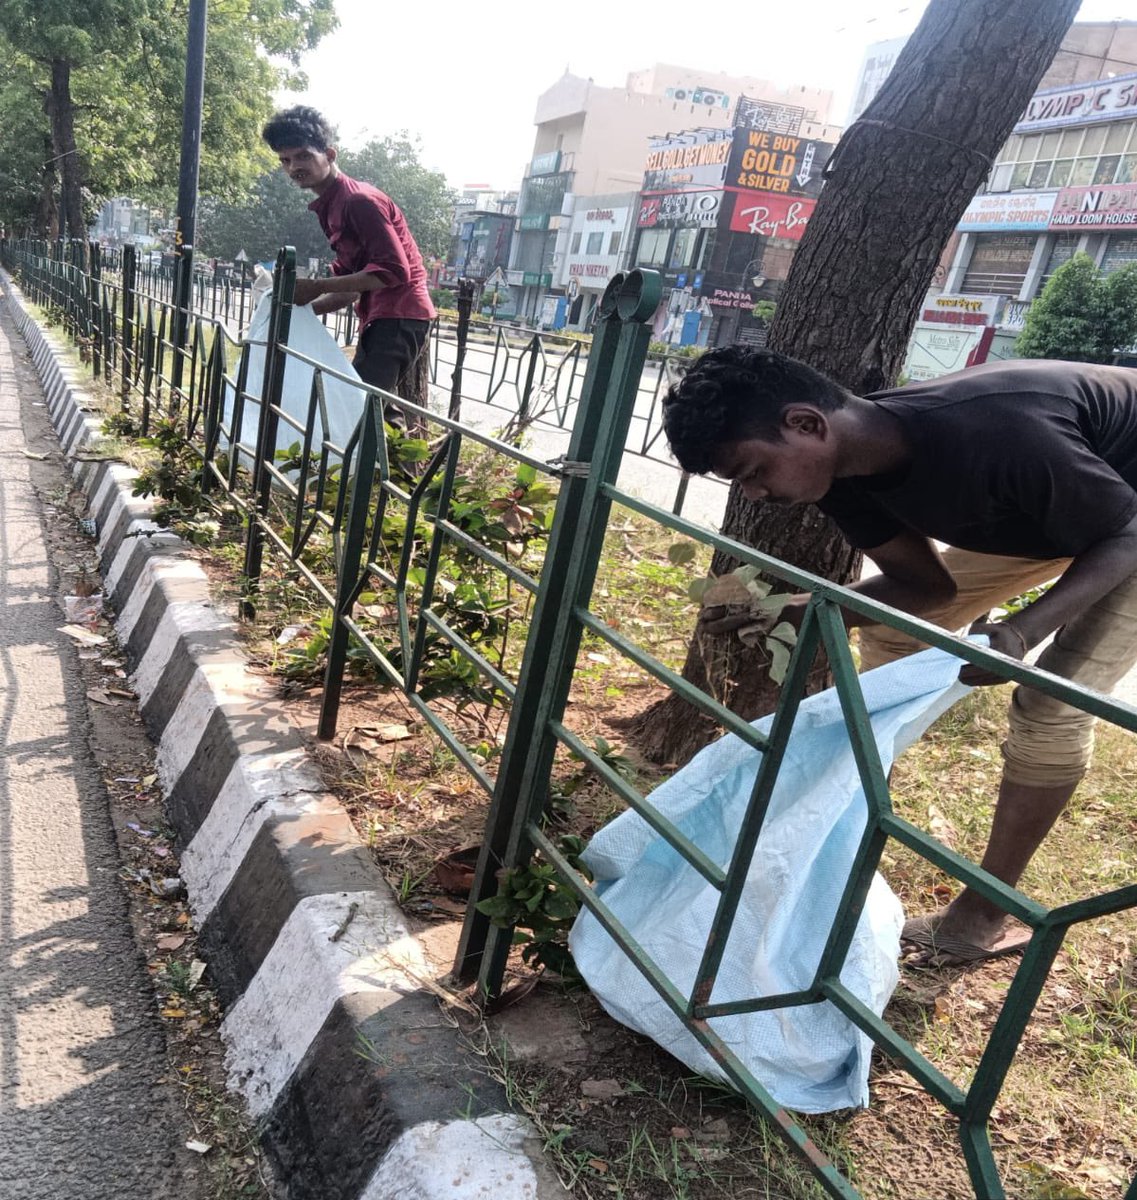 City medians and landscaping are routinely maintained by having trees trimmed, garbage picked up, bushes clipped, and plants replaced. #BhubaneswarFirst